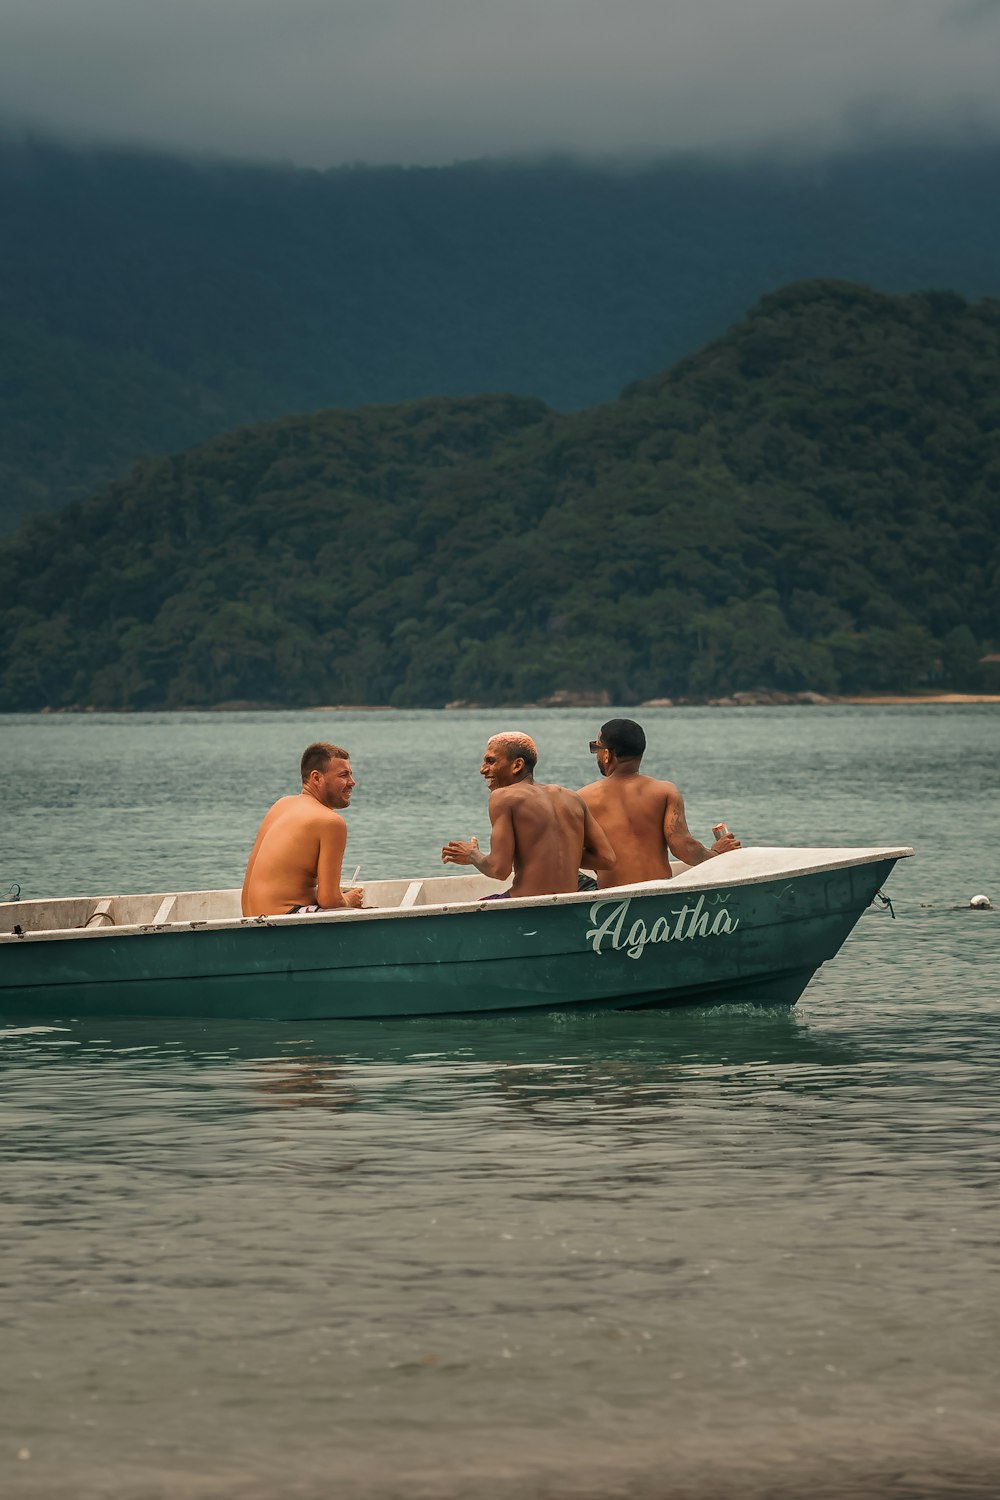 three men in a small boat on the water